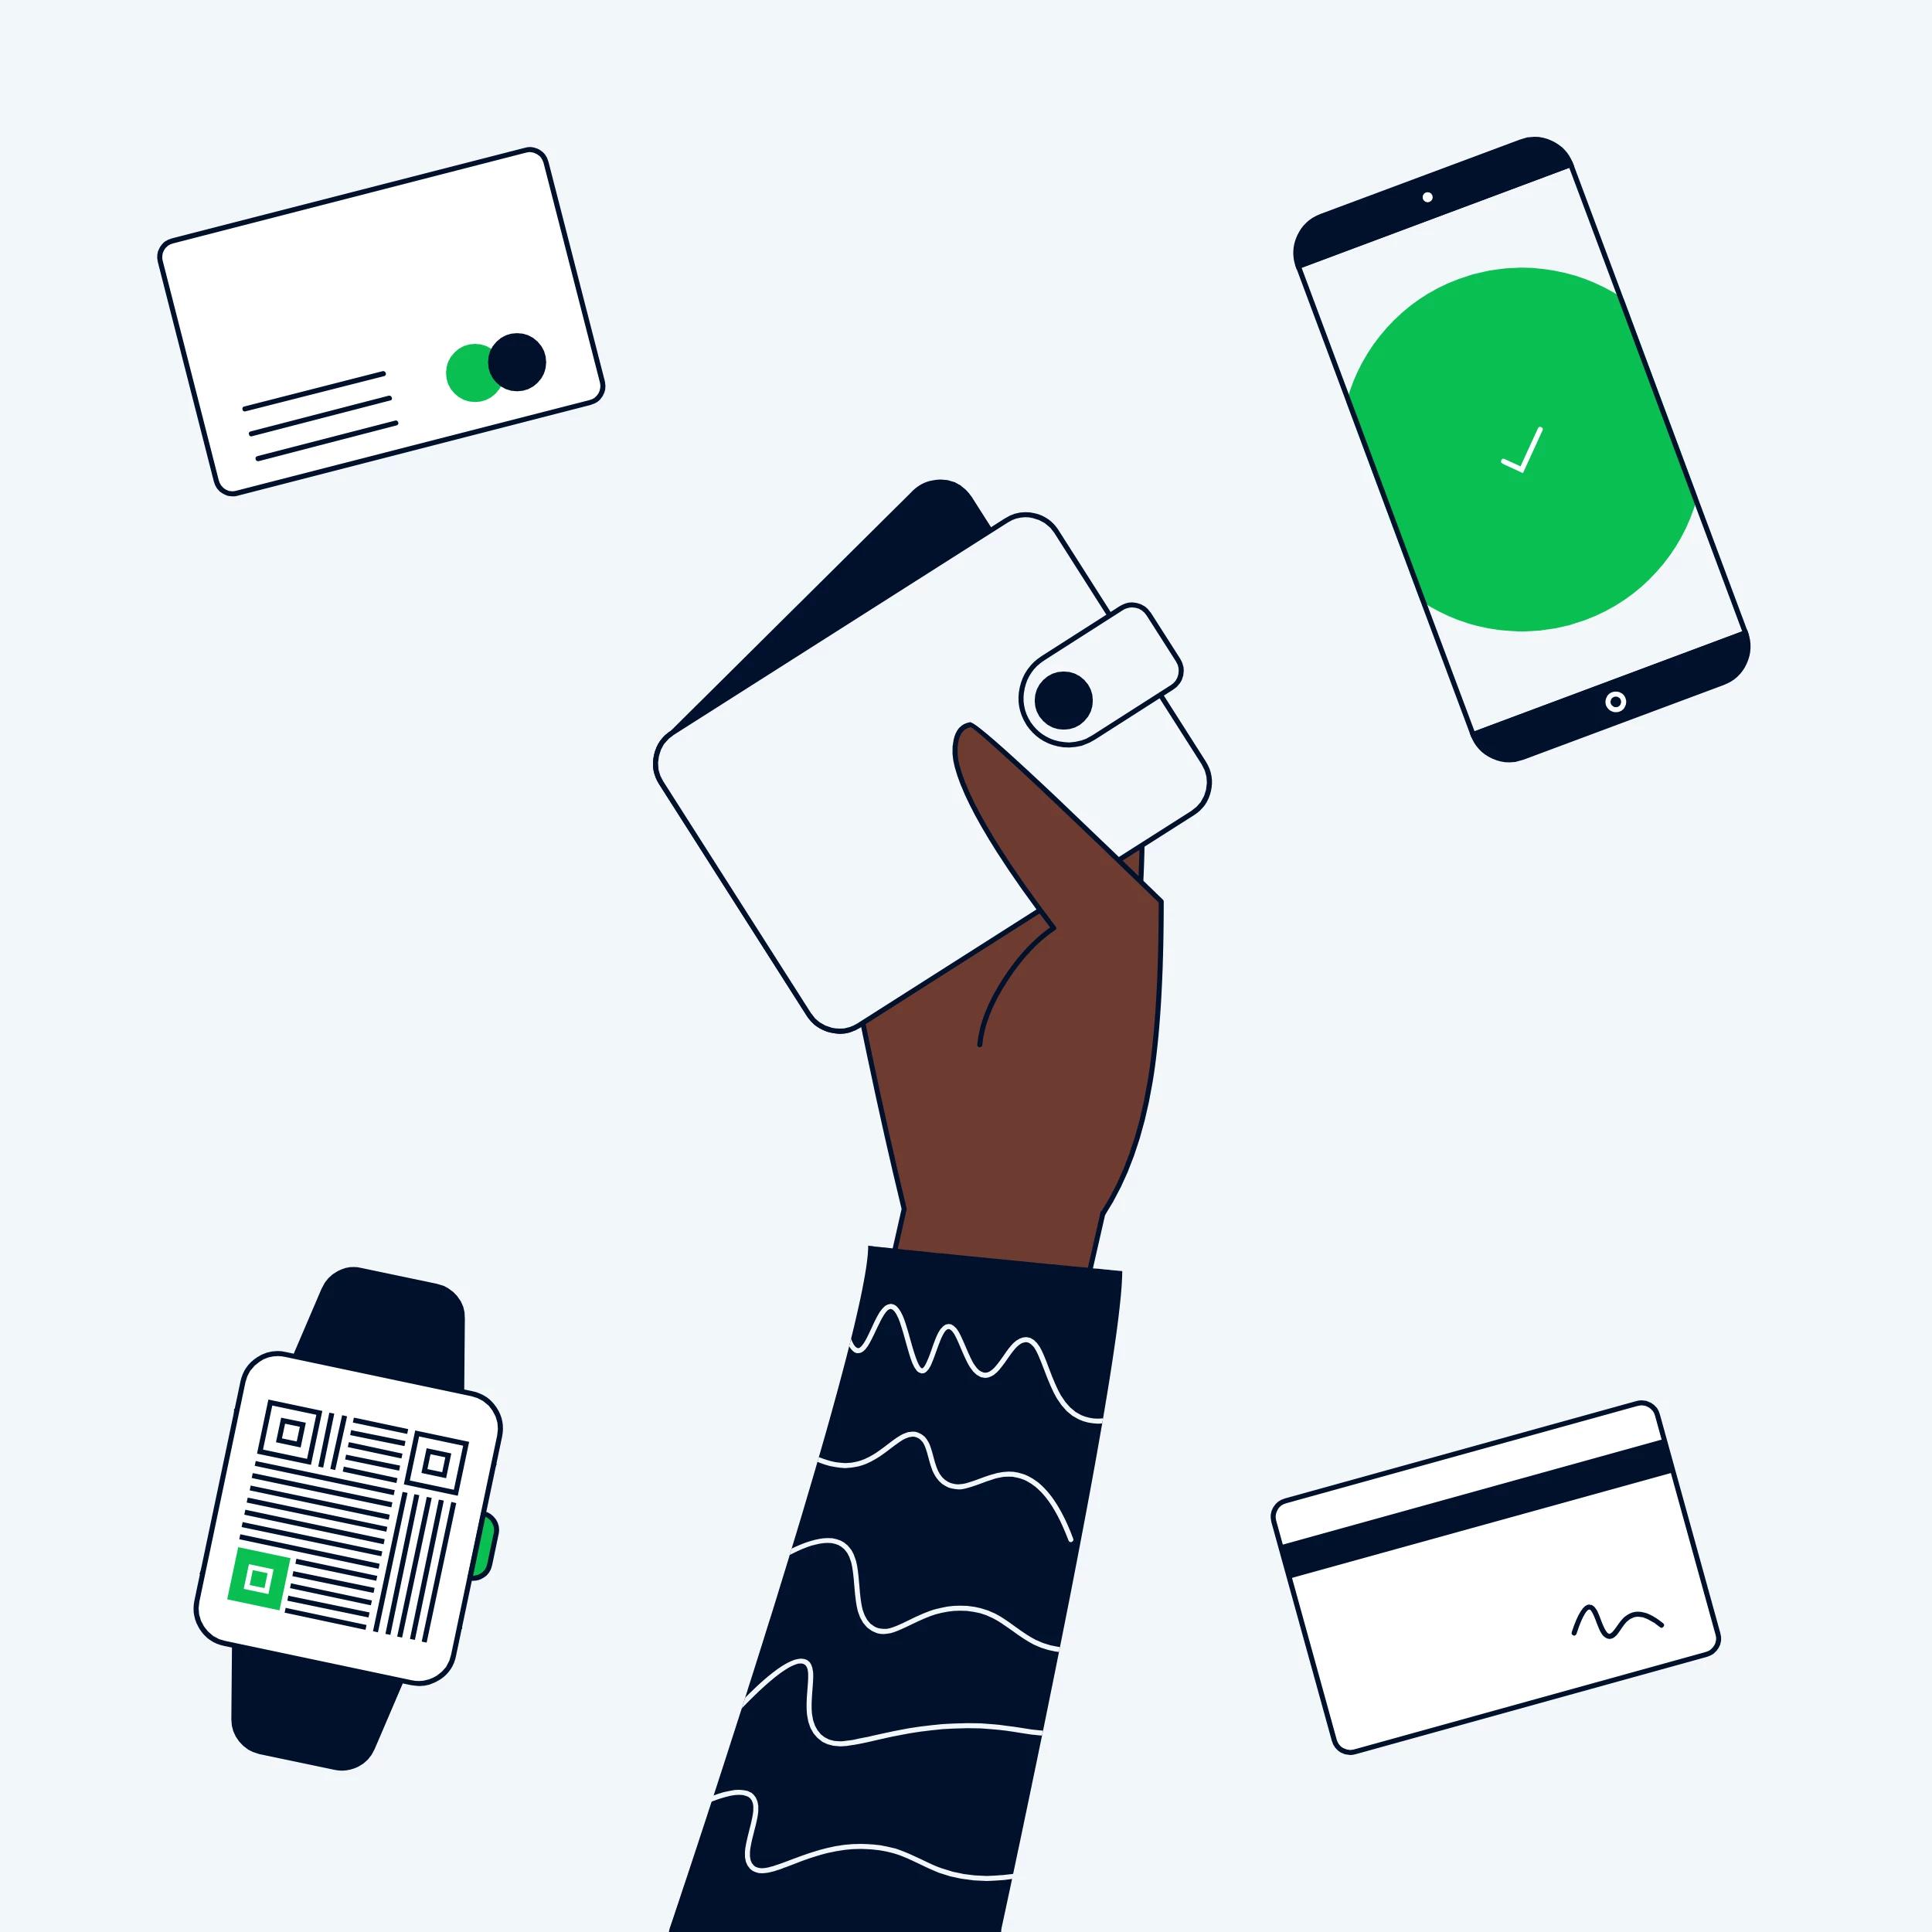 Illustration of a hand surrounded by contactless payment methods